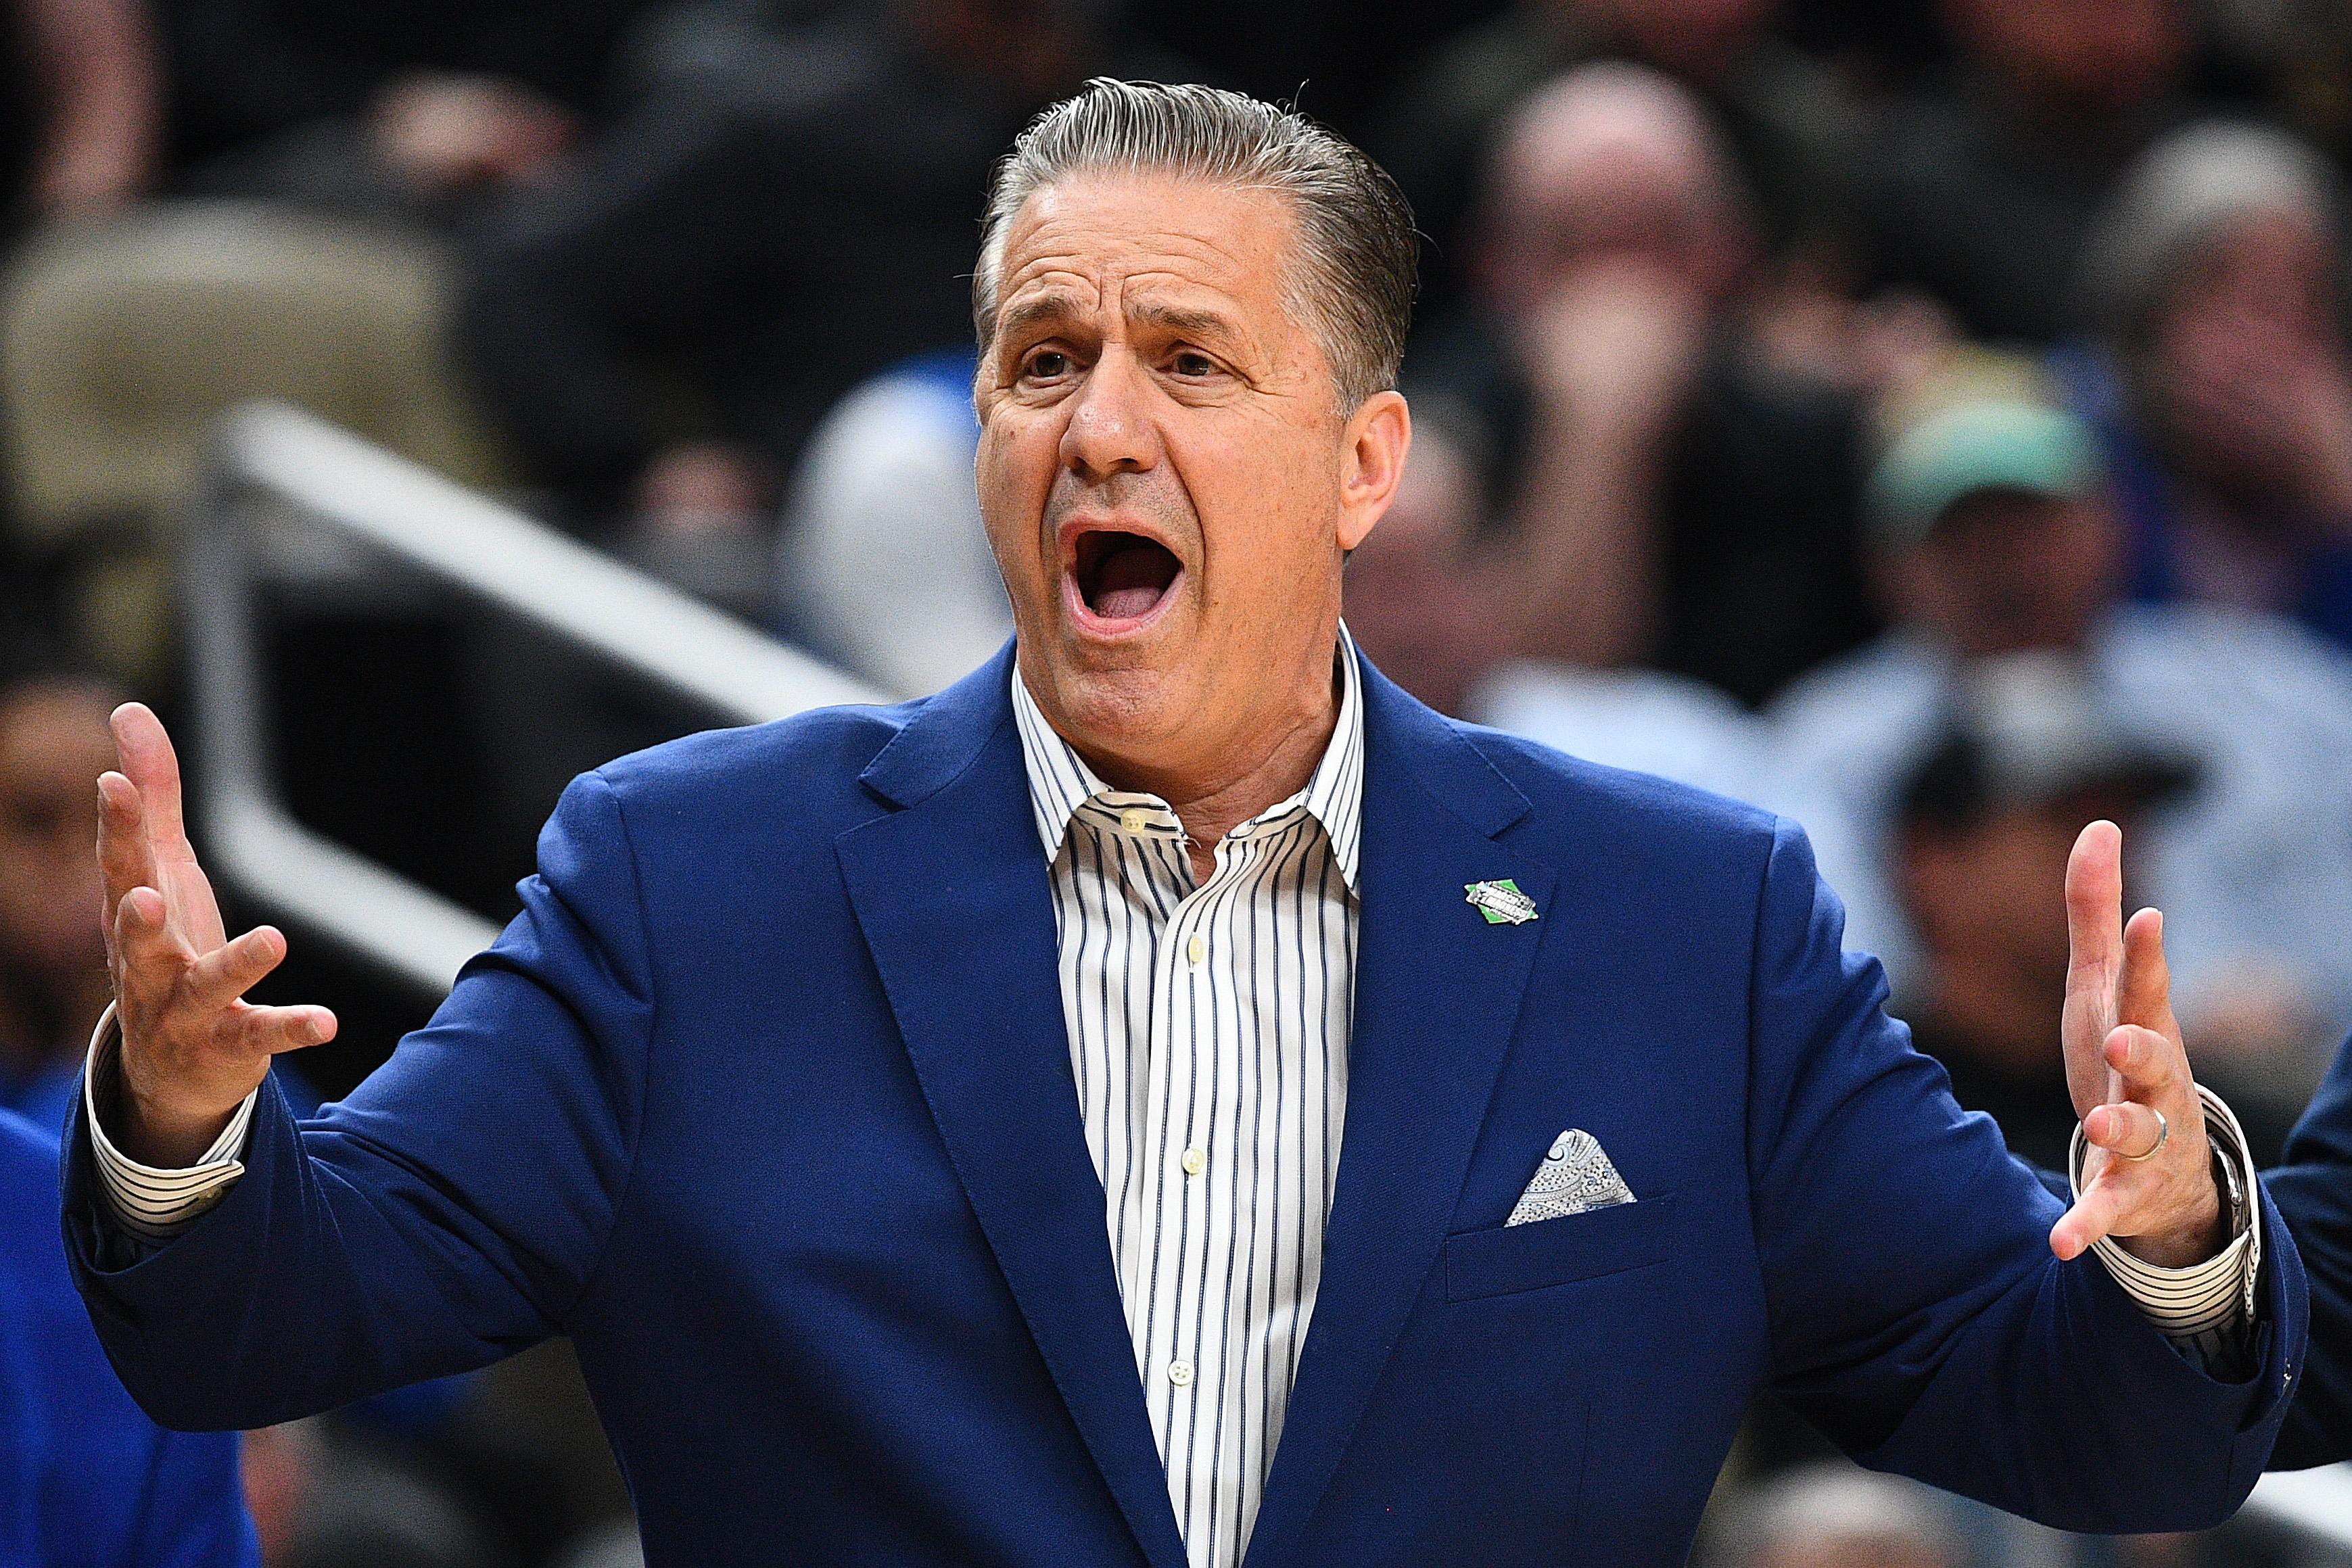 Calipari holds his hands out wide and yells.